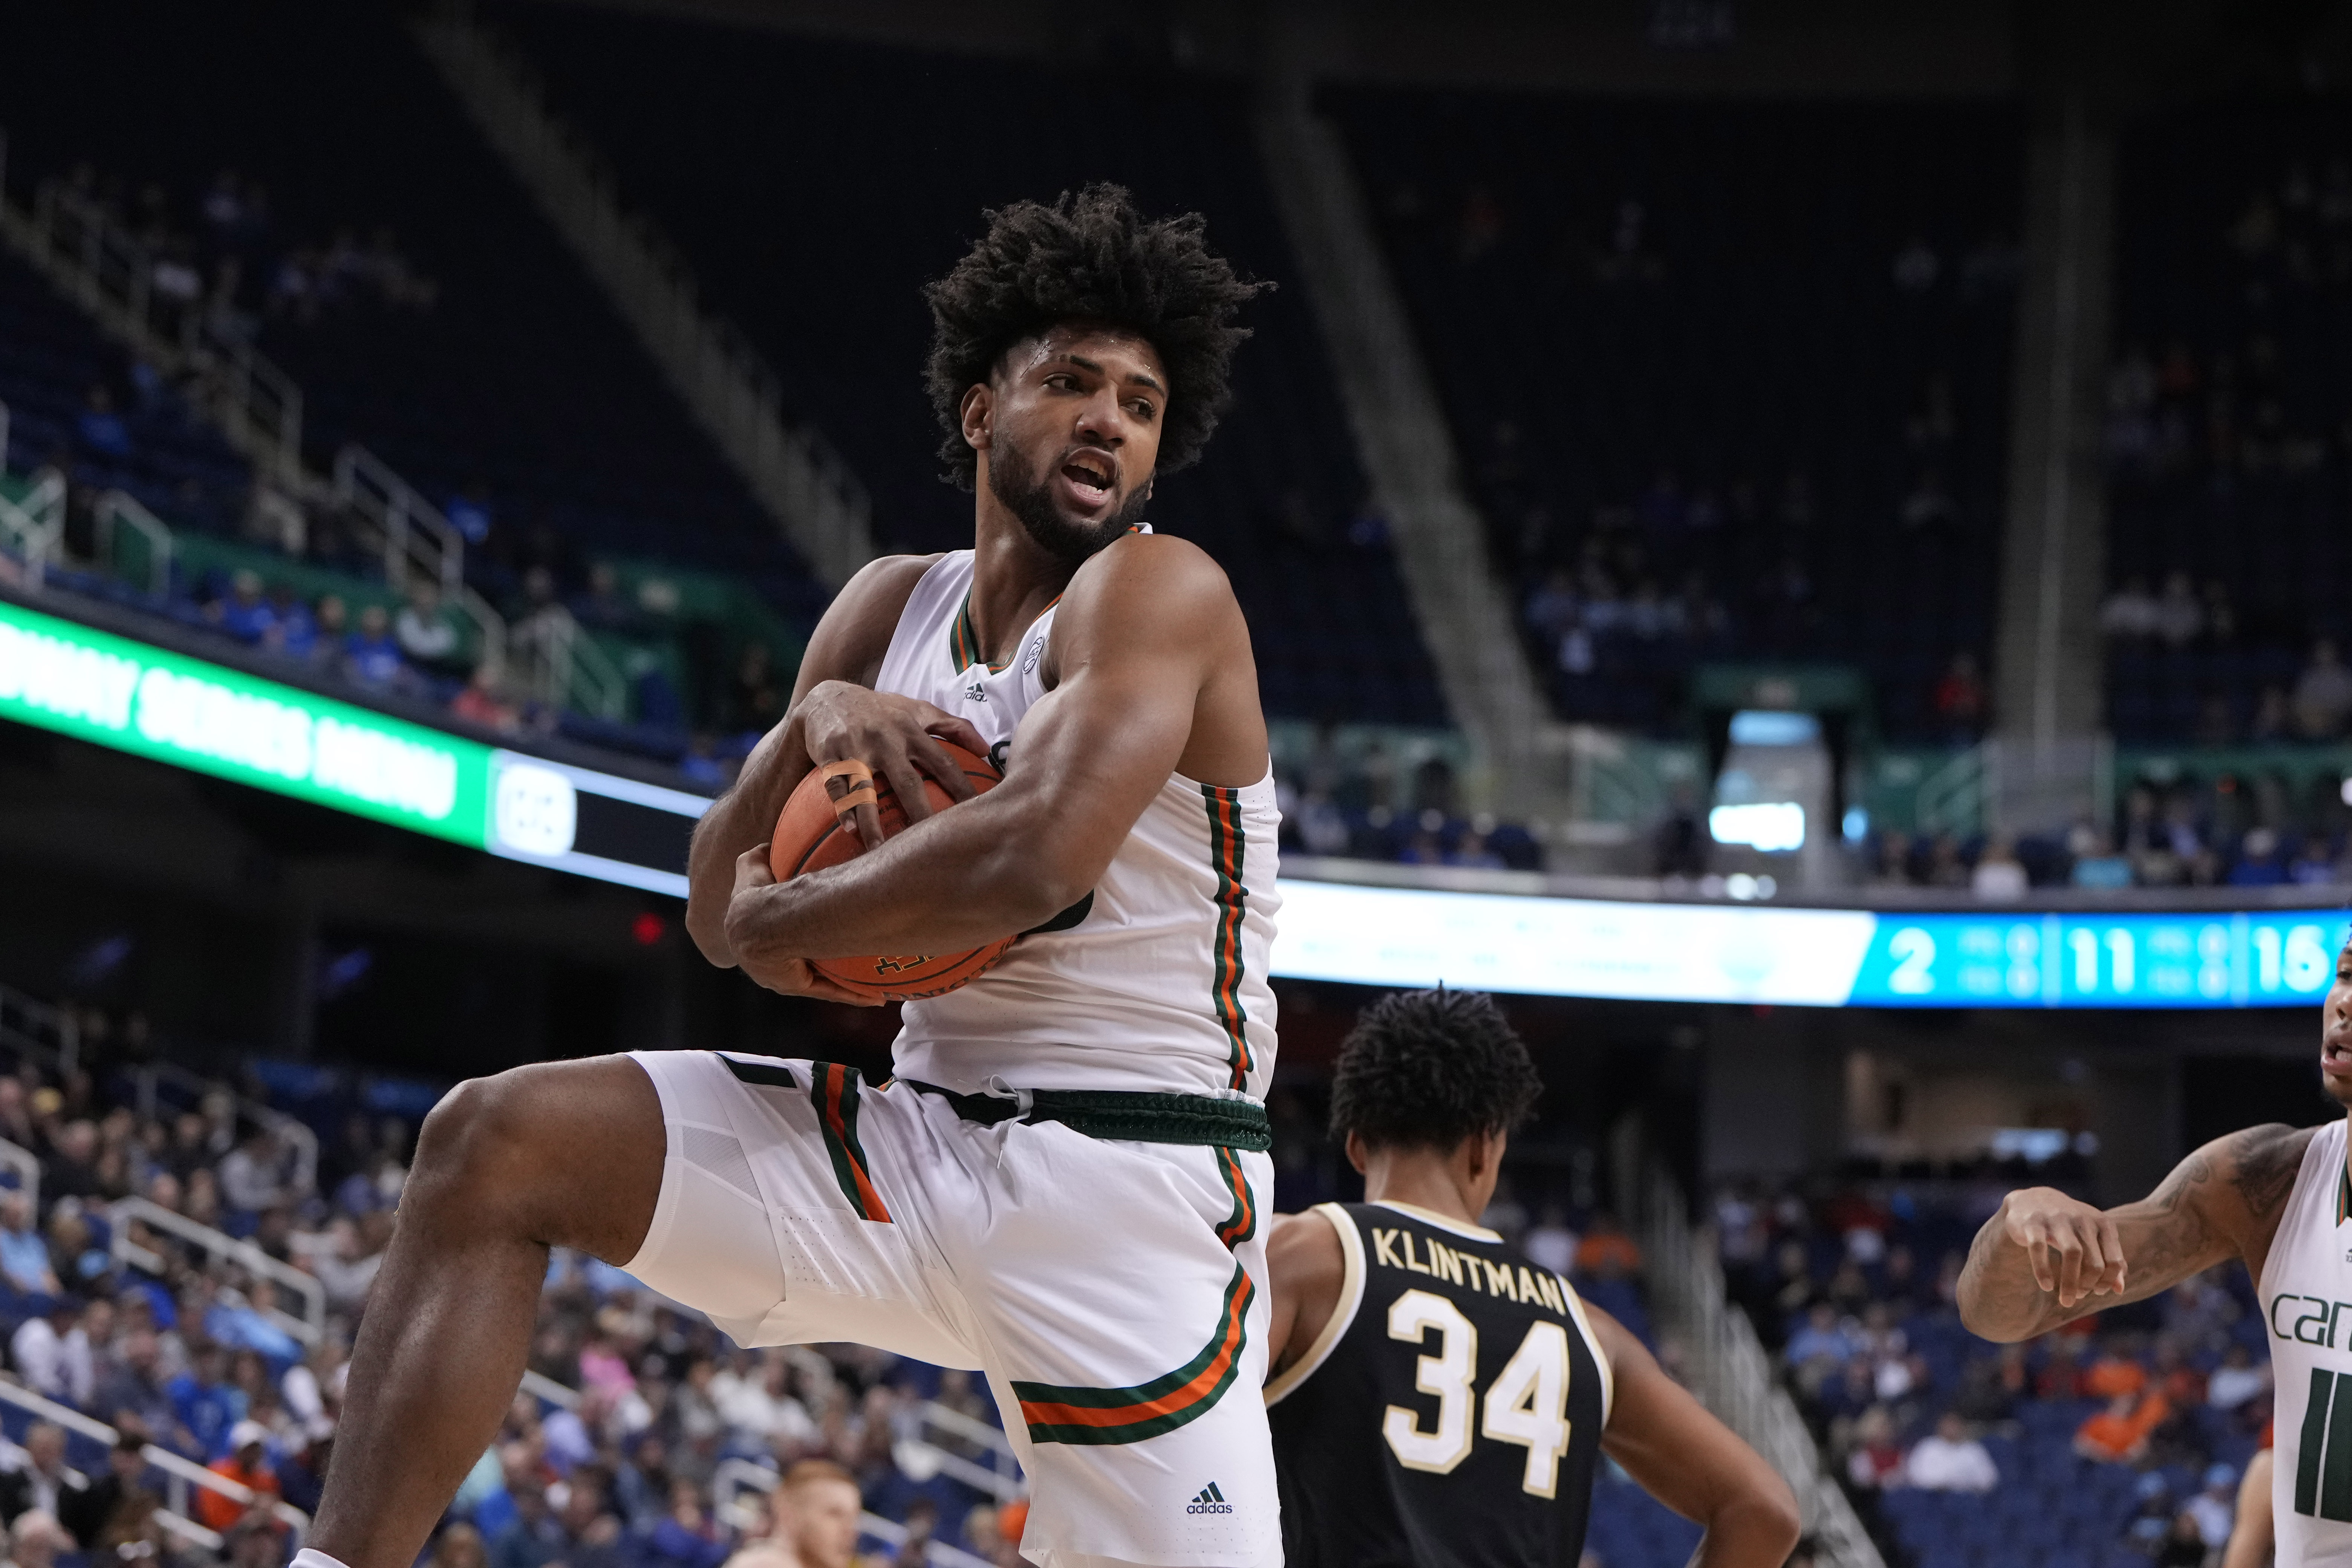 Miami Hurricanes forward Norchad Omier grabs a rebound during the first half of the quarterfinals of the ACC tournament at Greensboro Coliseum.